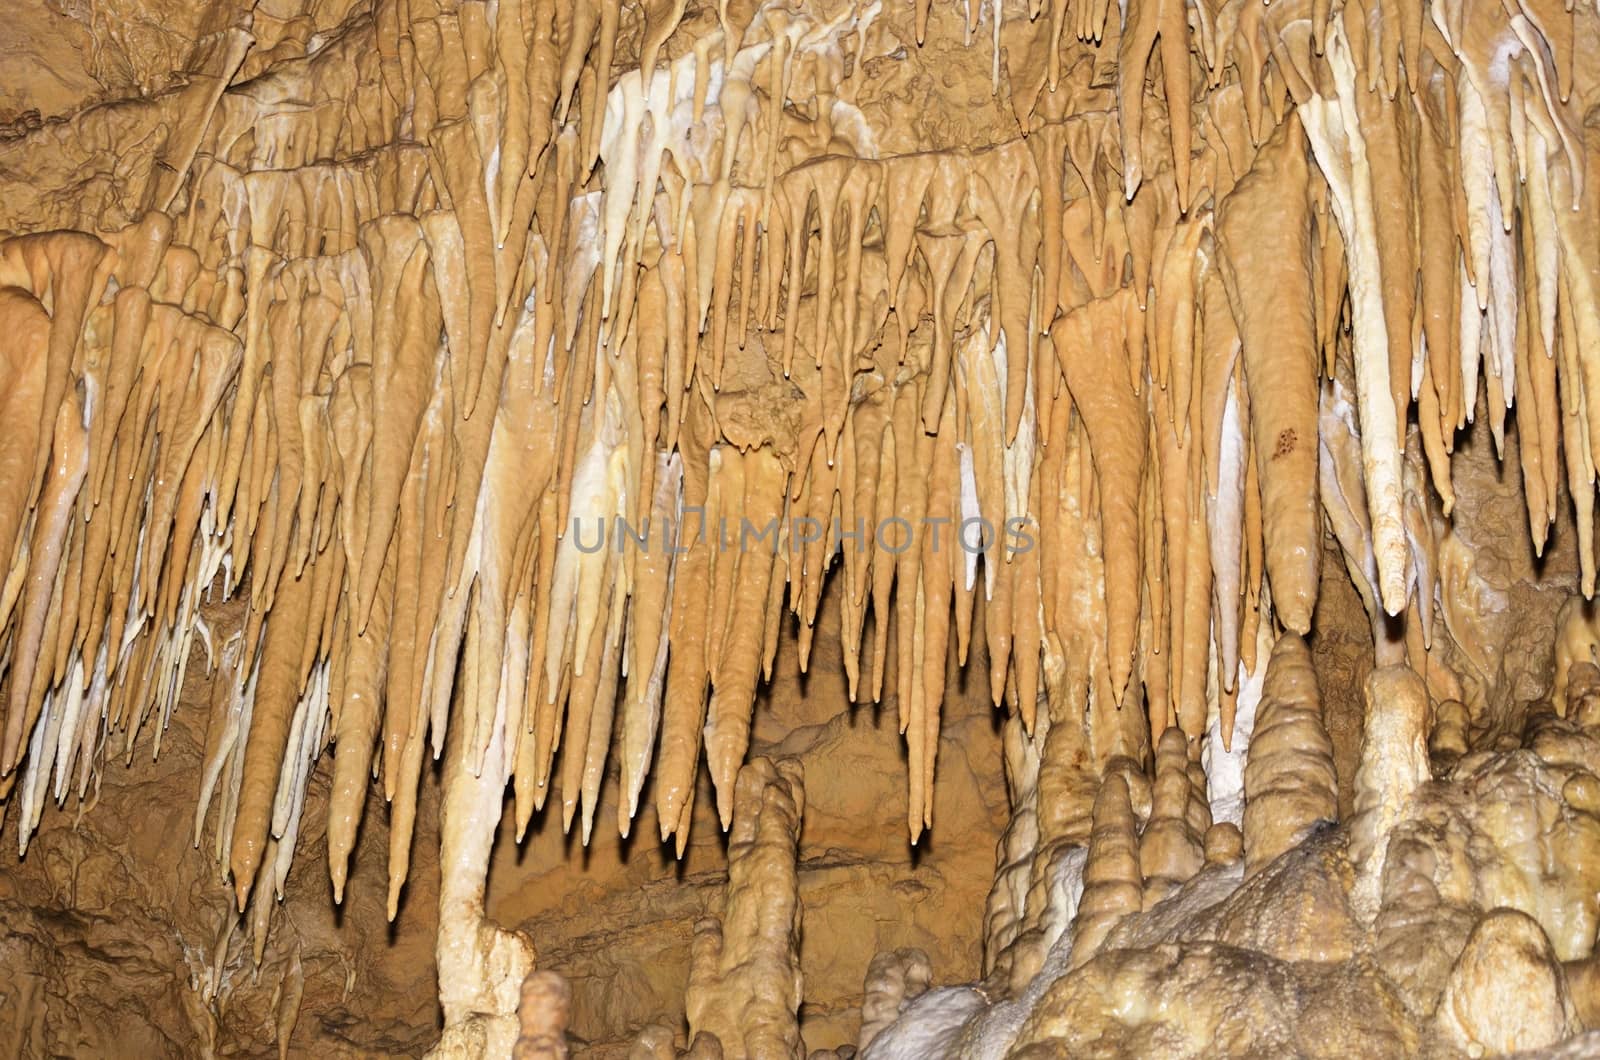 Stalactites in cave by pauws99